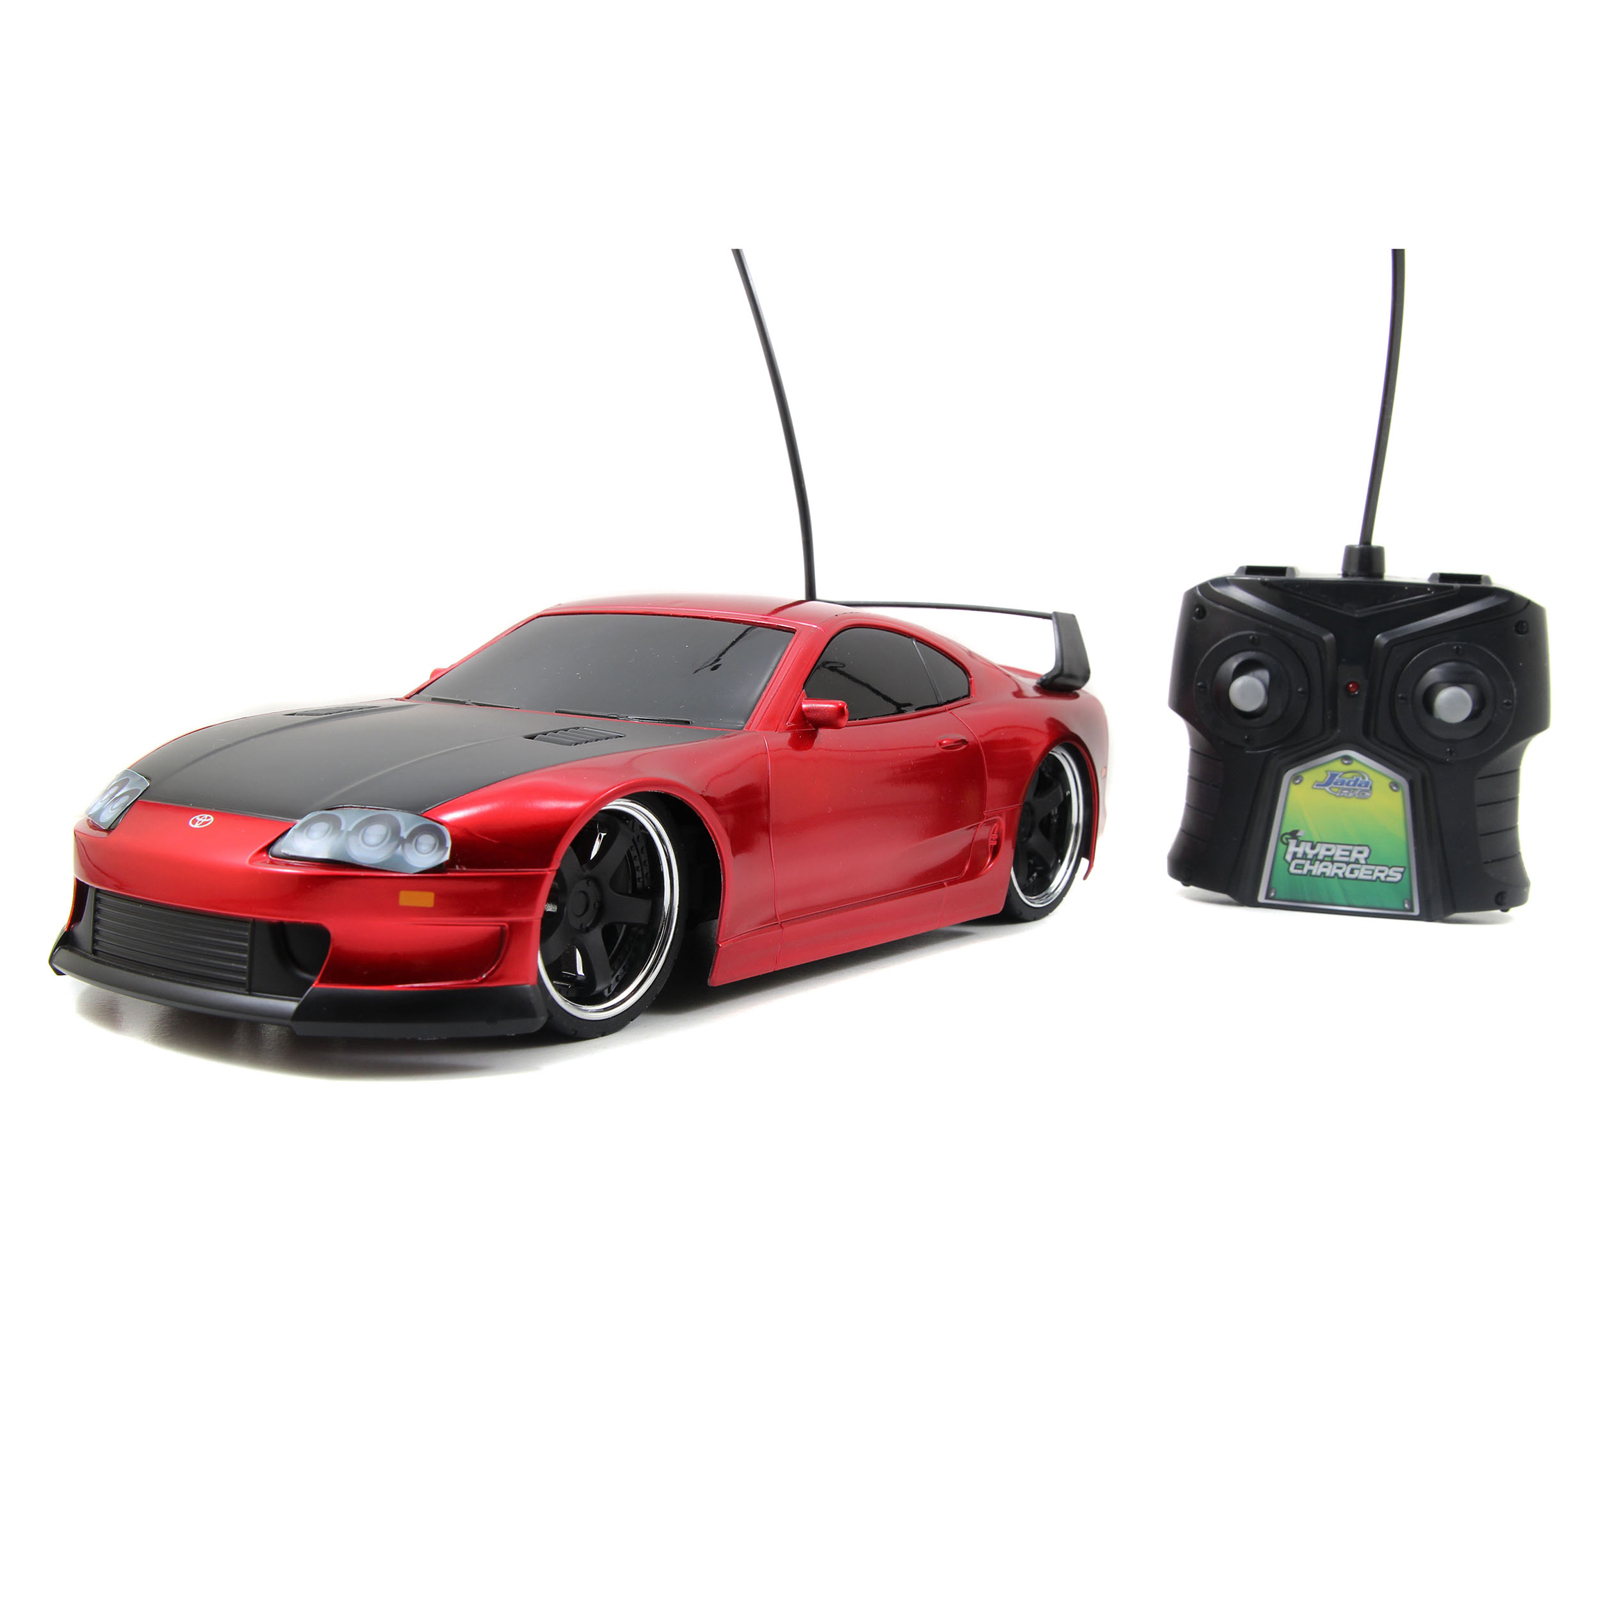 HyperChargers 1:16 Tuner Exotic Toyota Supra Remote Control Car